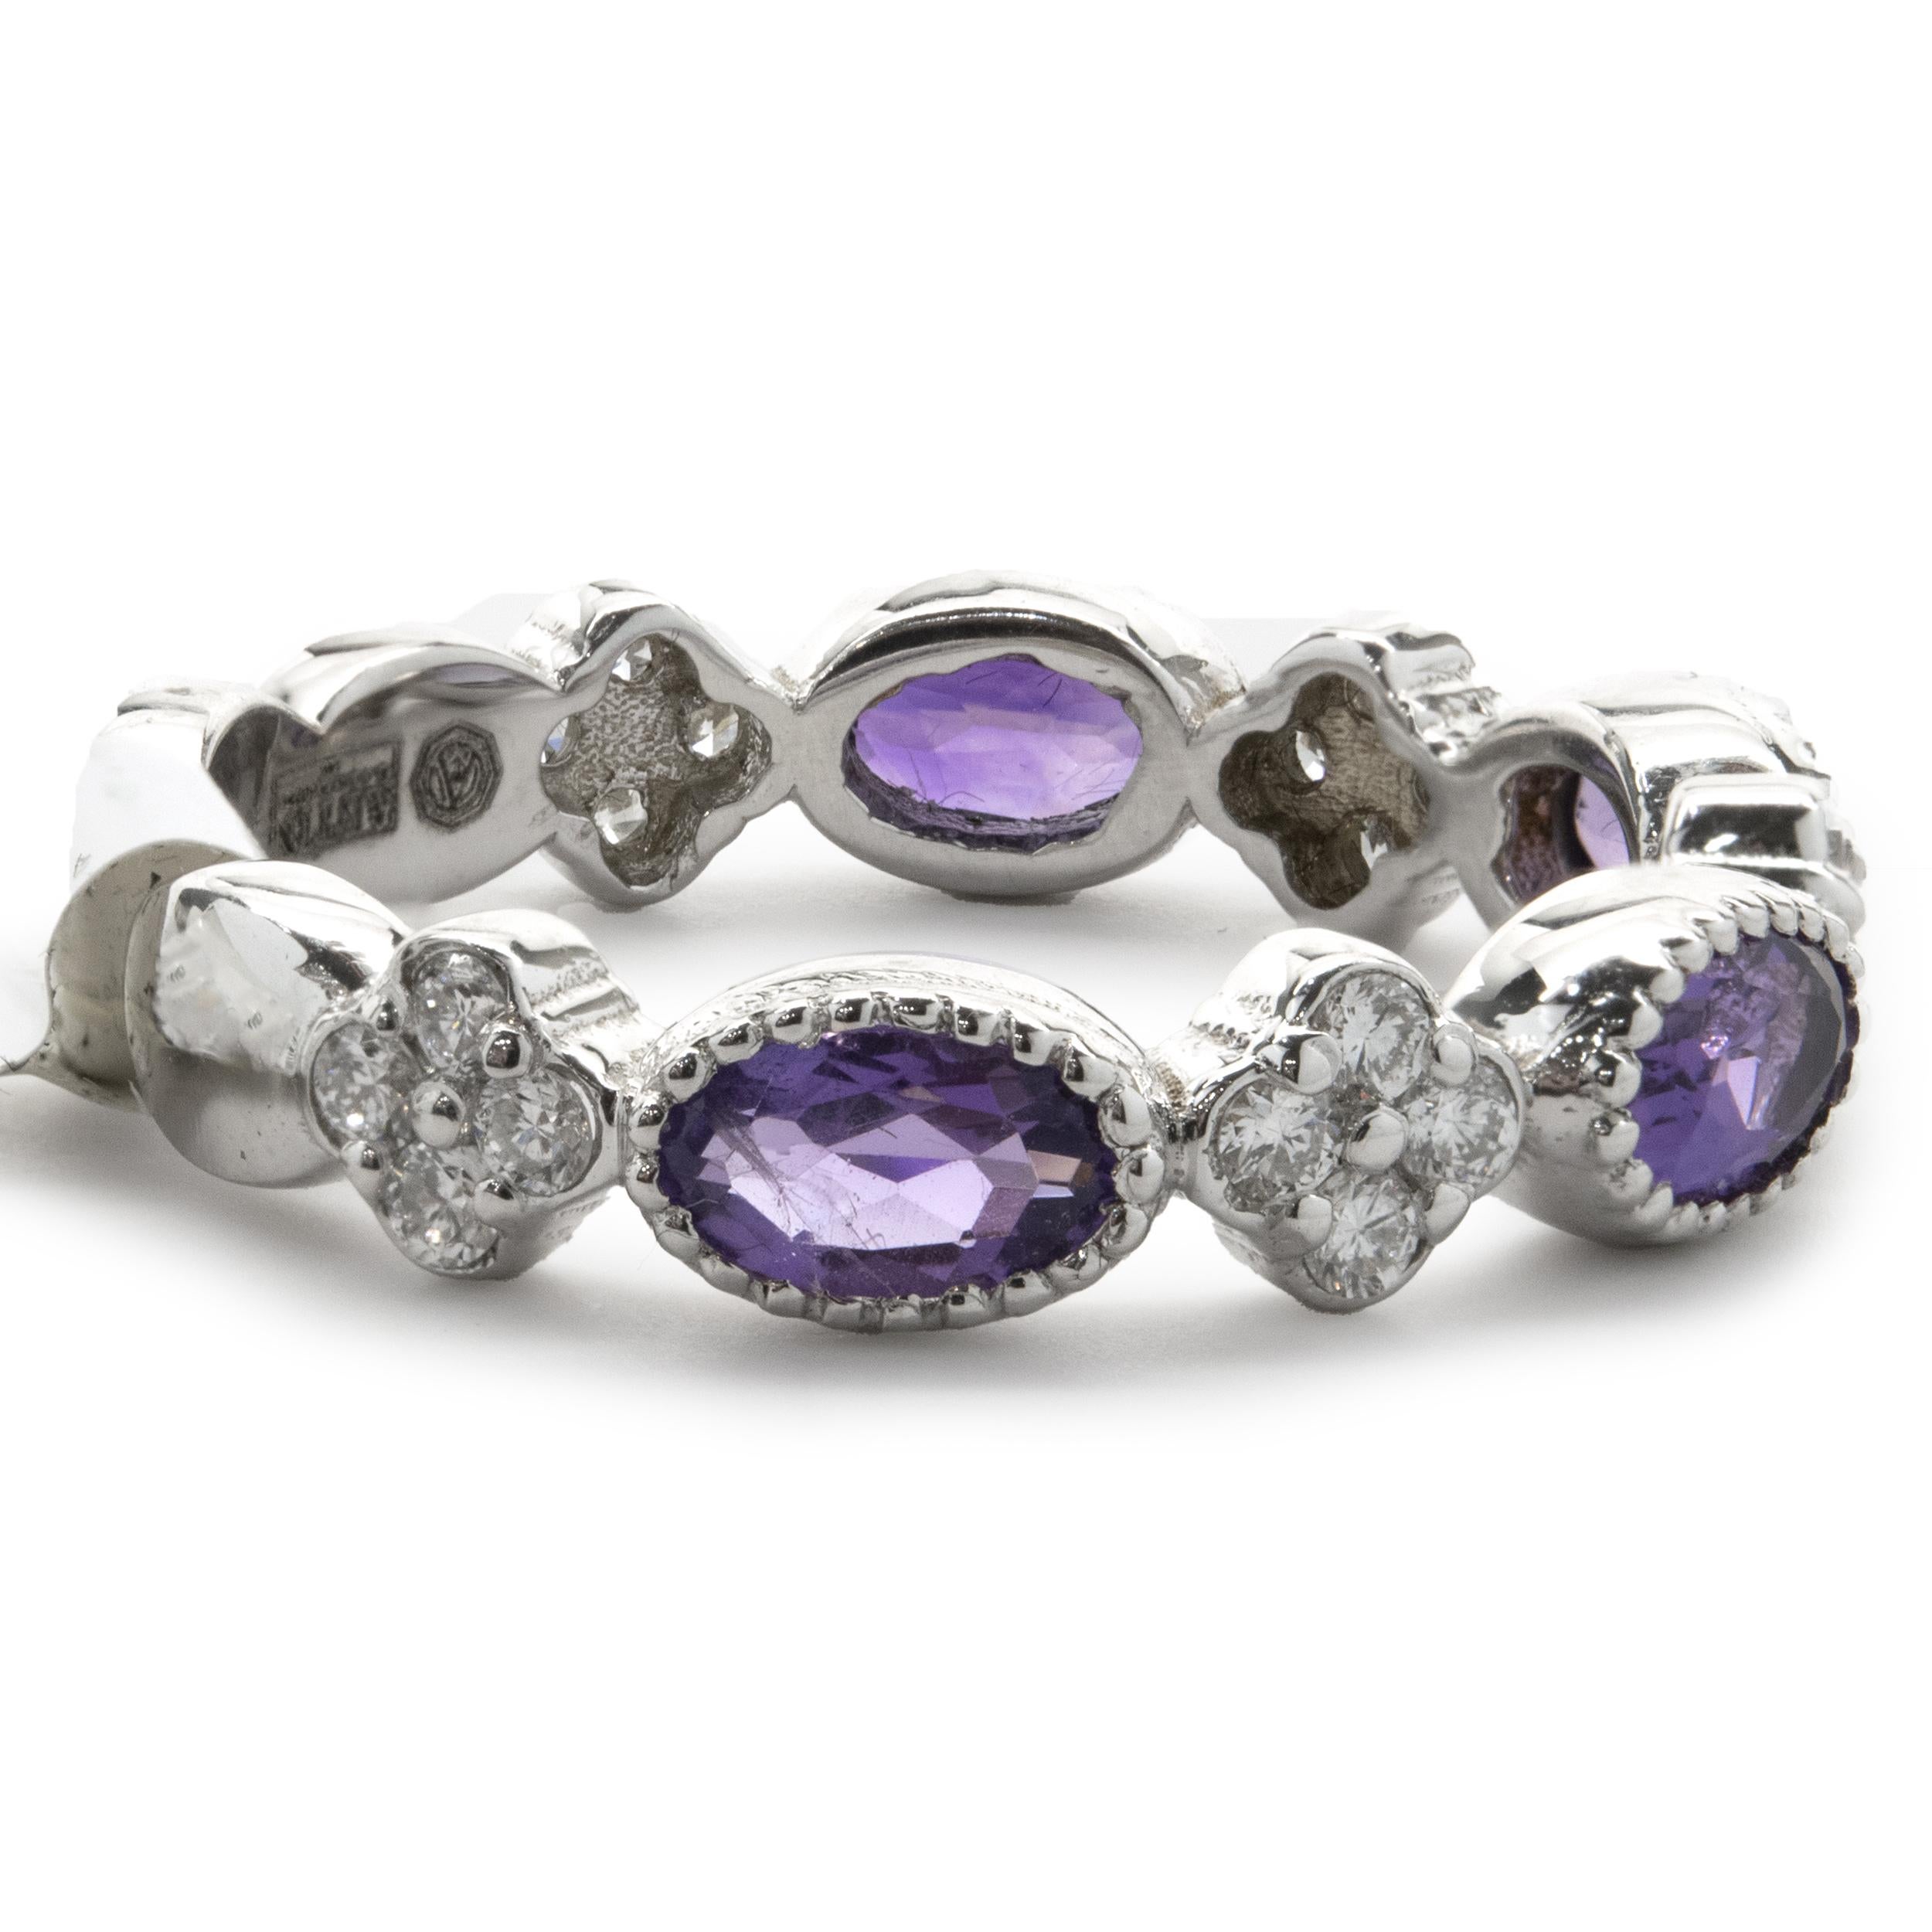 Designer: custom design
Material: 14K white gold
Amethyst: 4 oval cut = 0.42cttw
Diamond: 20 round brilliant cut = .27cttw
Color: G
Clarity: SI1
Dimensions: band measures 4.10mm wide
Ring Size: 7 (complimentary sizing available)
Weight: 3.45 grams
